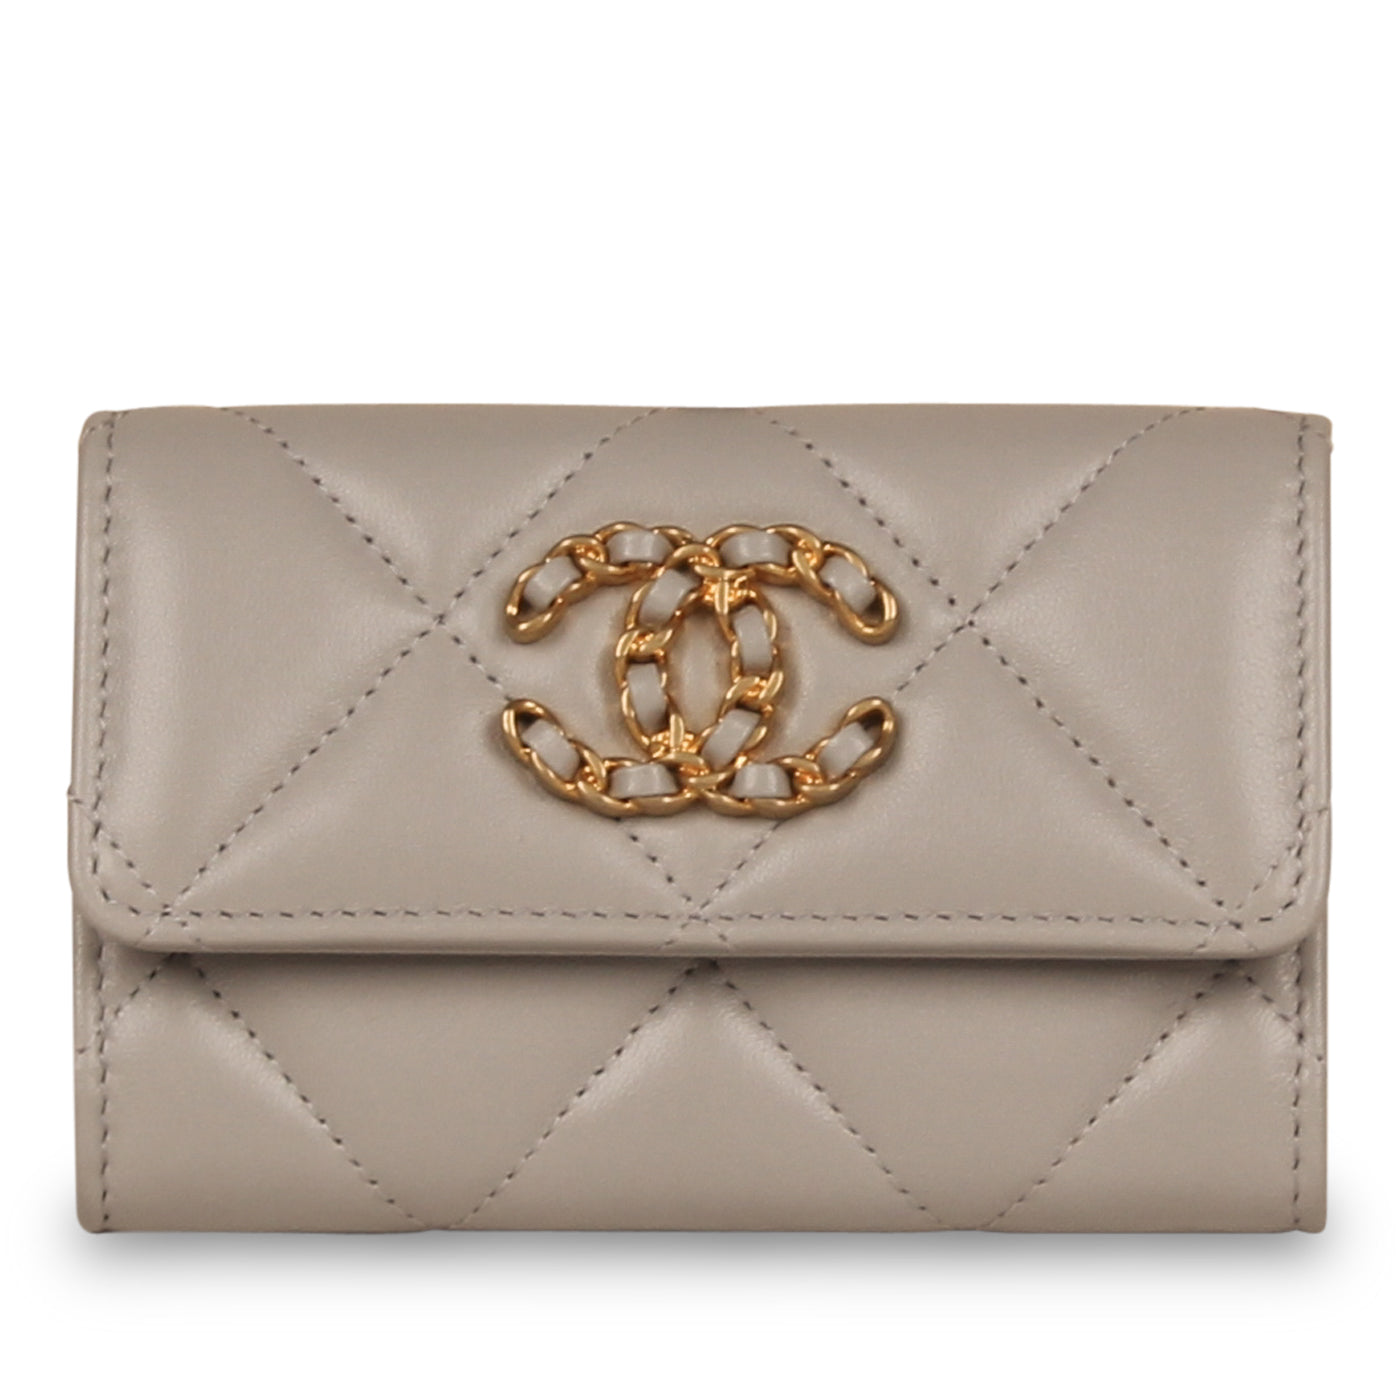 Buy Online Chanel-CHANEL 19 FLAP WALLET-AP0953 with Attractive